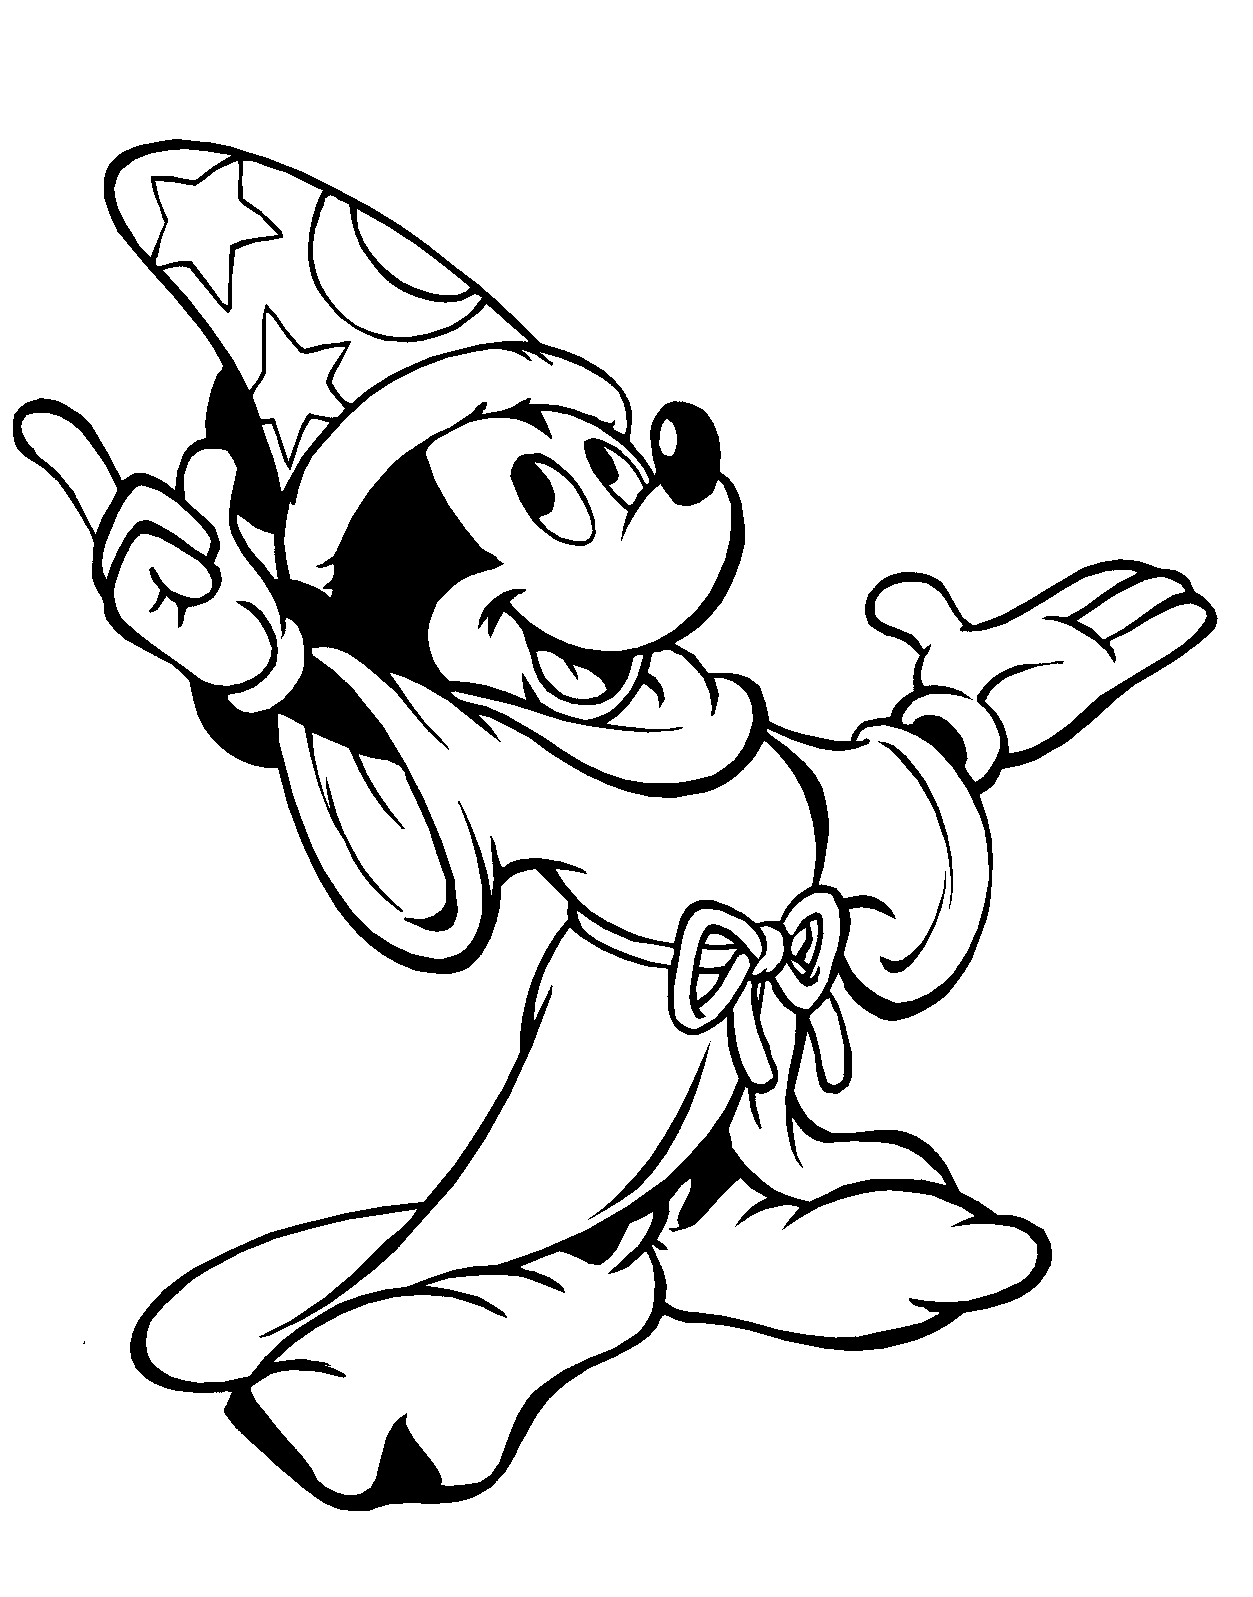 Mickey Mouse Coloring Page Free Printable Mickey Mouse Coloring Pages For Kids